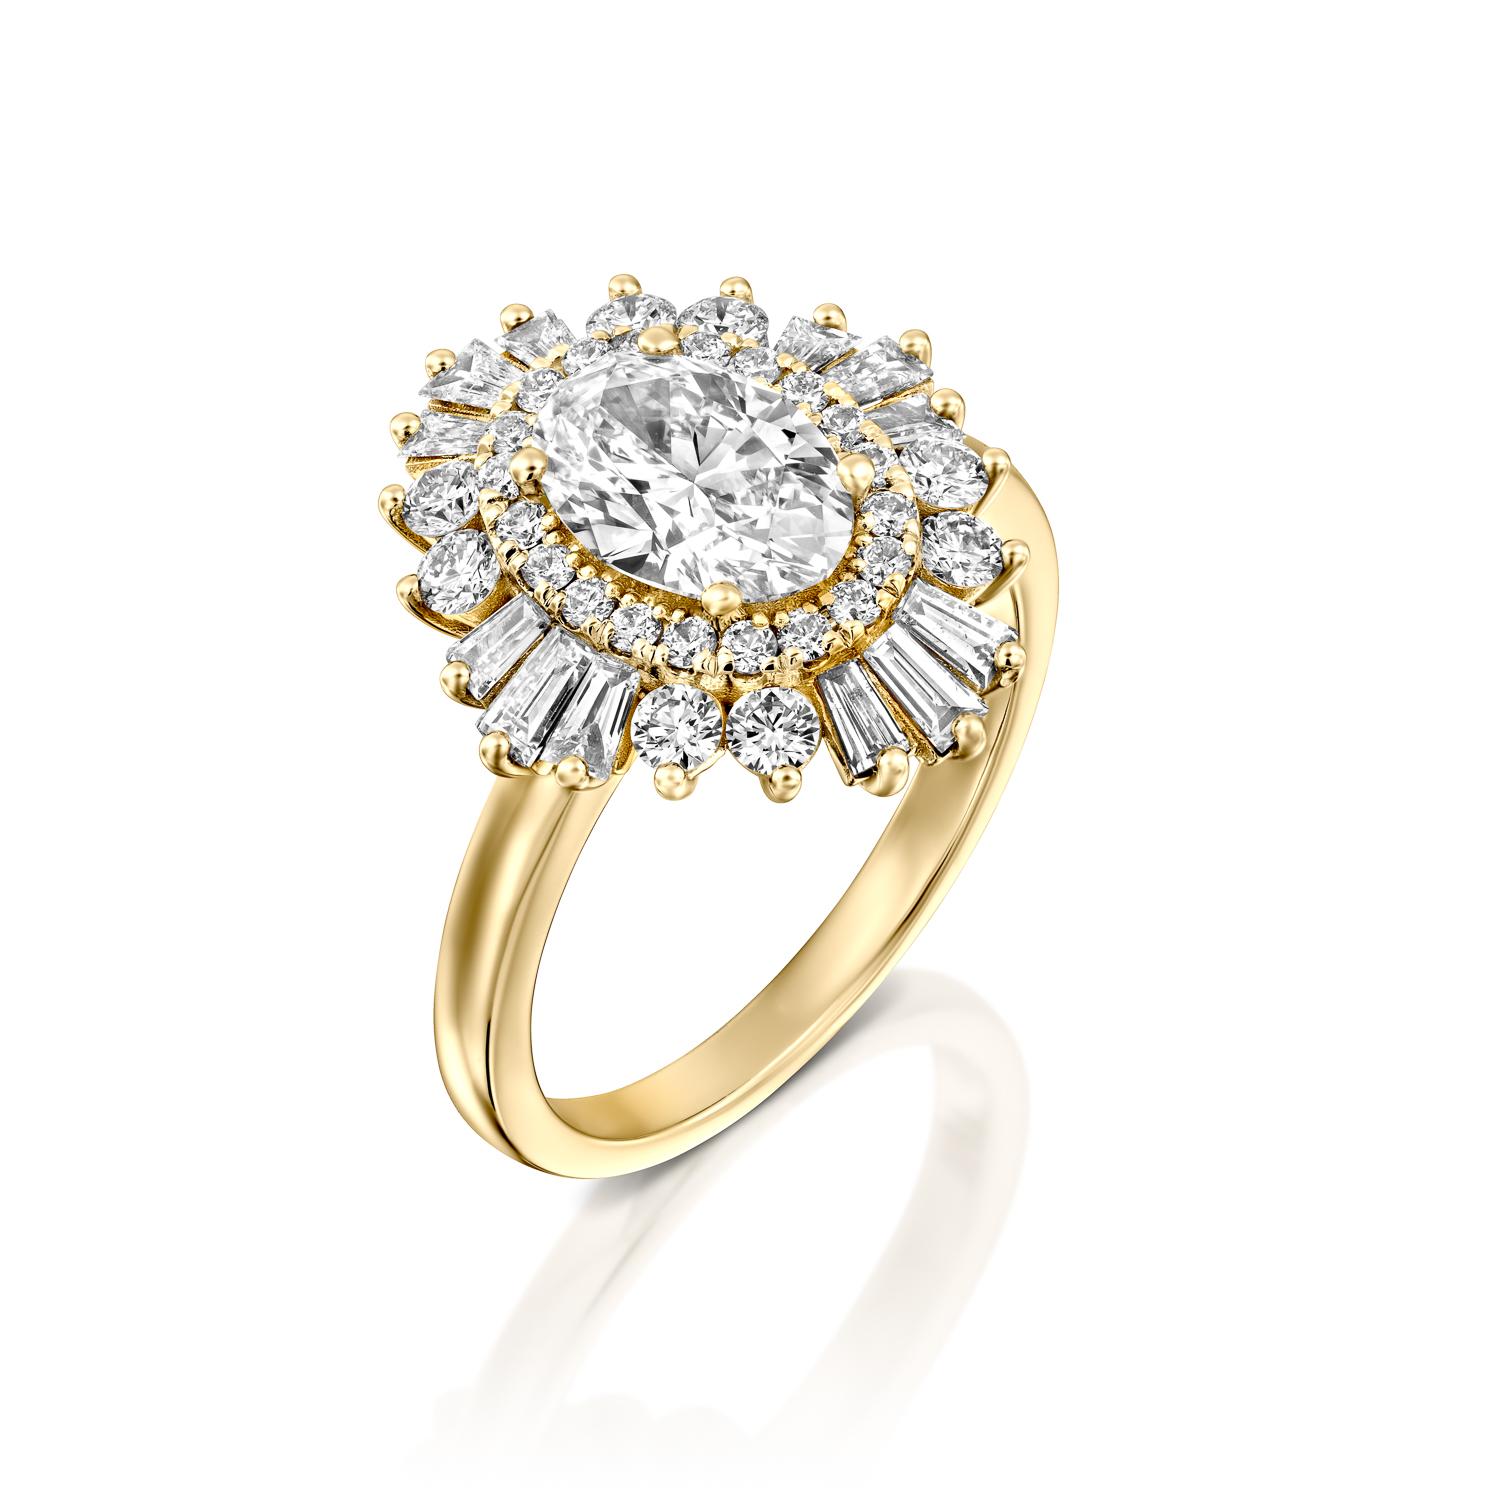 Beautiful solitaire with accents Gatsby style GIA certified diamond engagement ring. Ring features a 1 carat oval cut 100% eye clean natural diamond of F-G color and VS2-SI1 clarity and it is surrounded by smaller natural diamonds of approx. 3/4